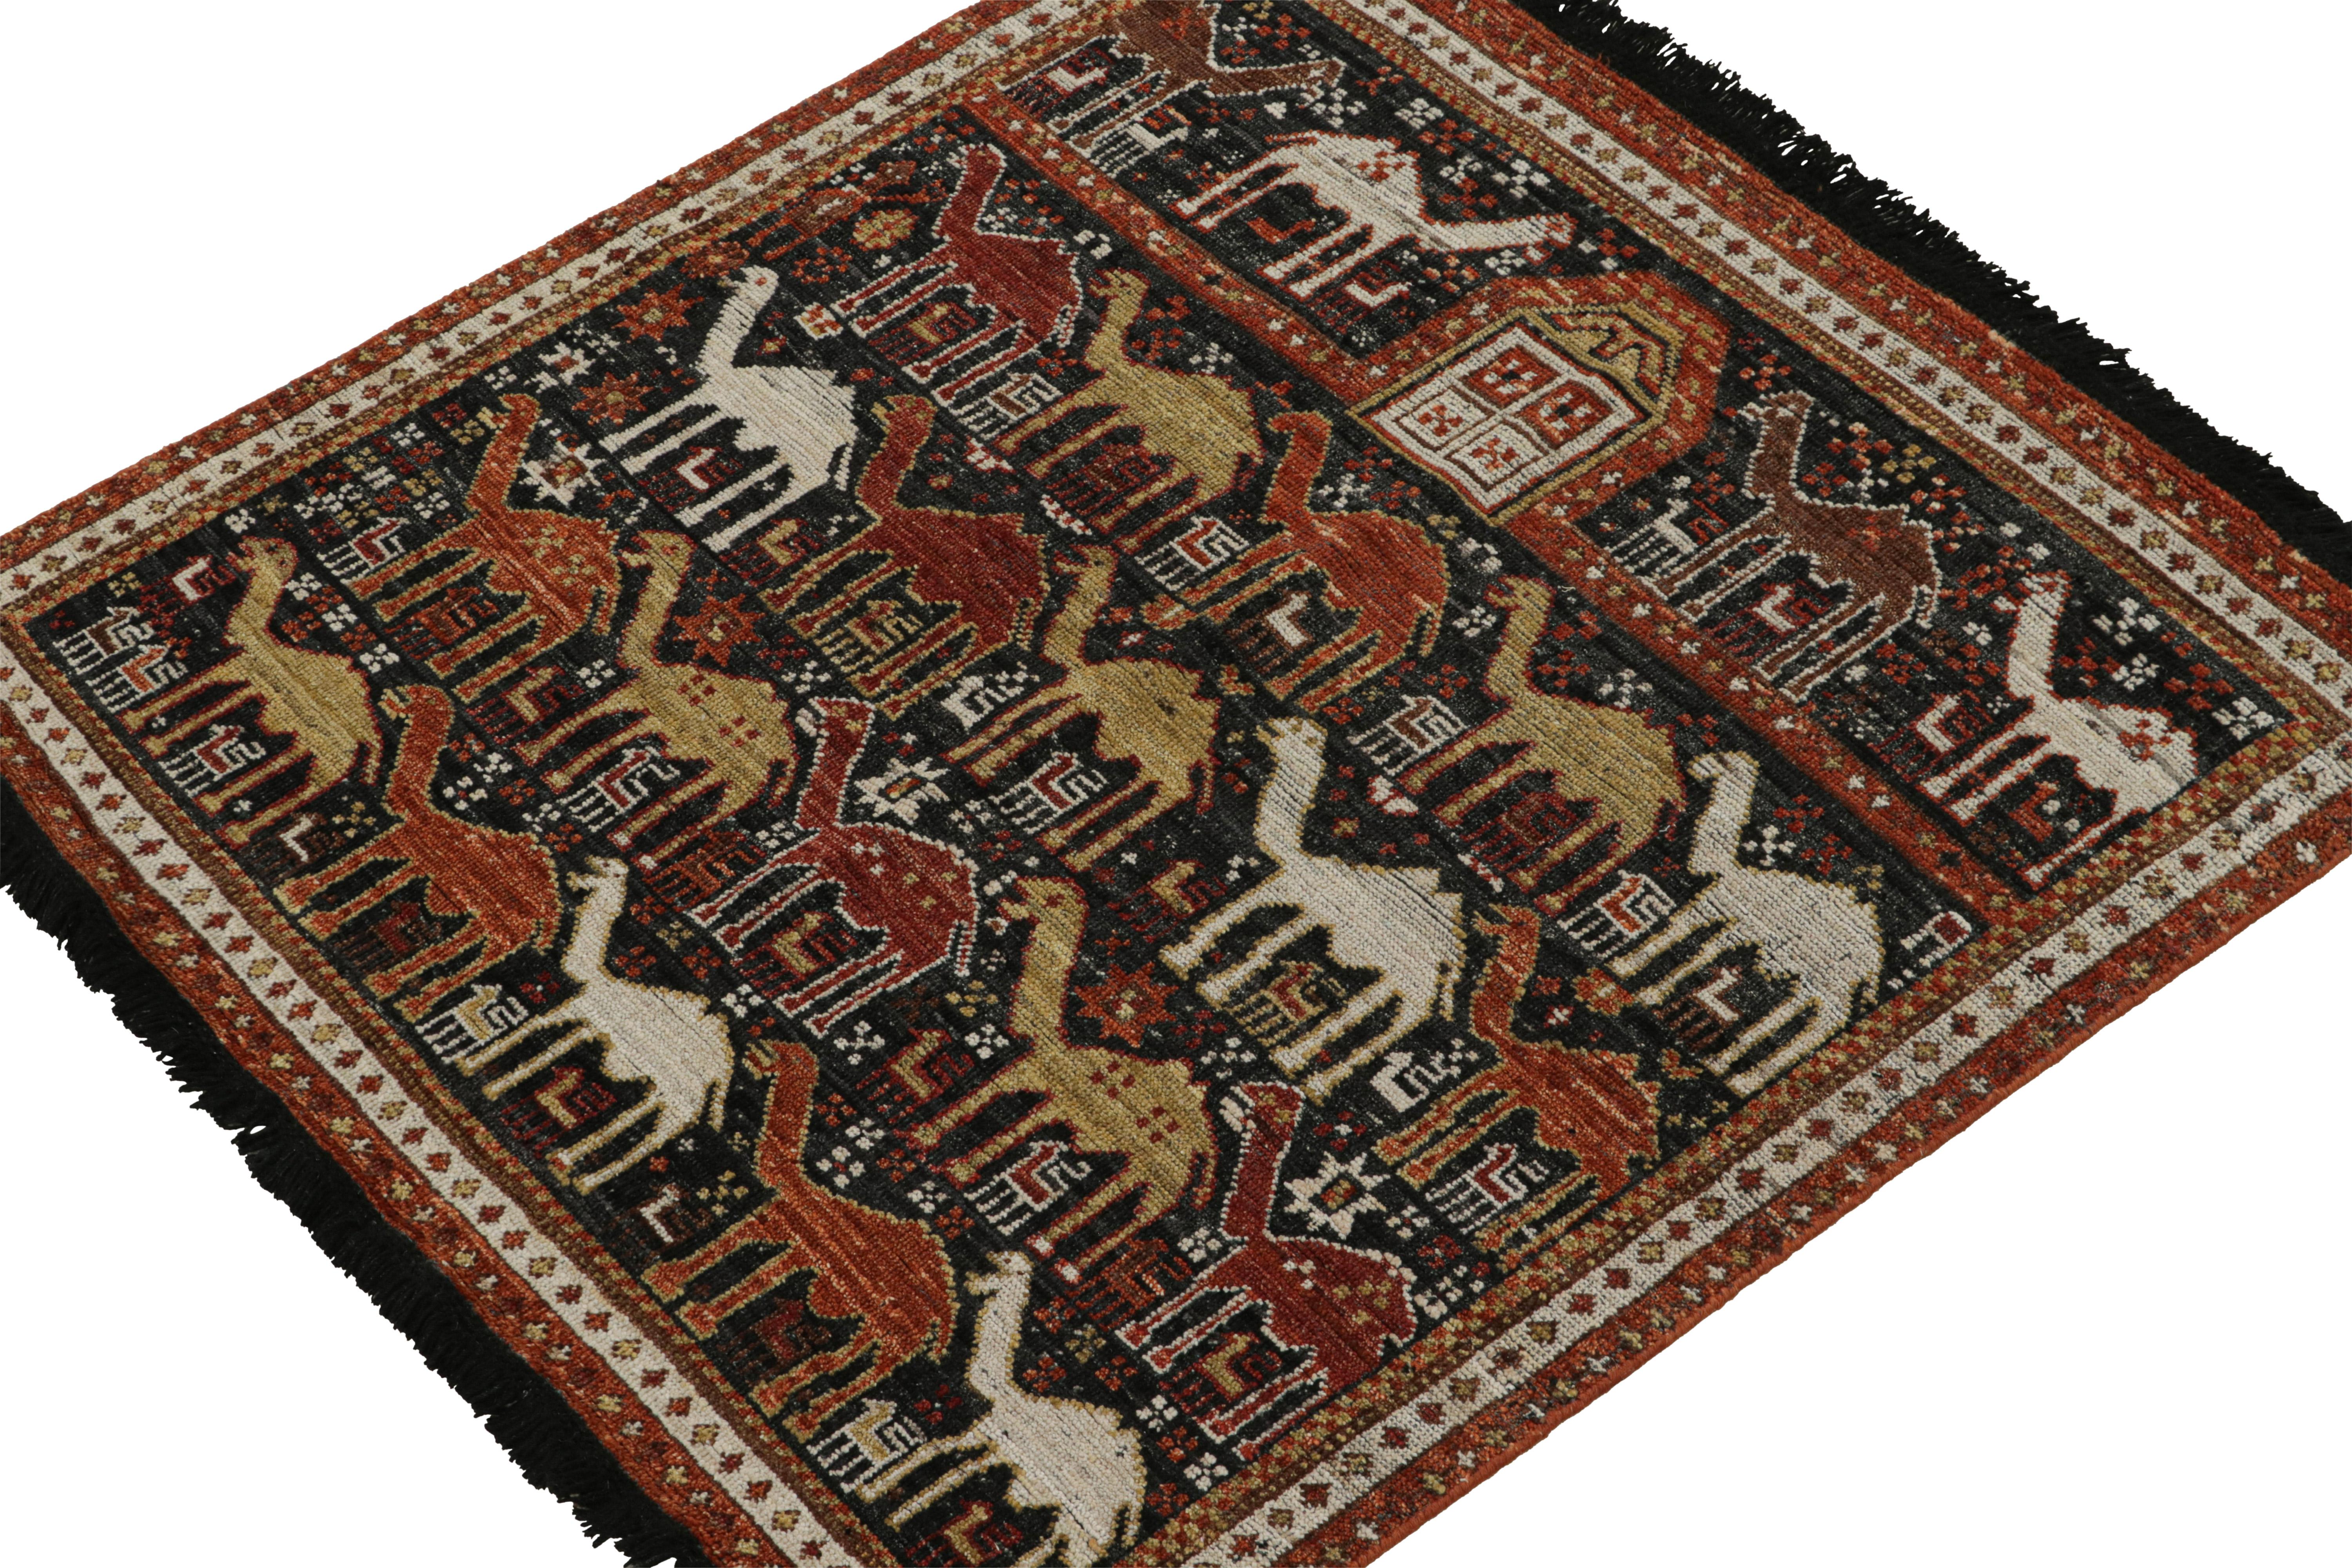 Inspired by antique Caucasian Shirvan rugs, this 4x4 classic style rug from the Burano Collection by Rug & Kilim showcases a montage of distinguished pictorial patterns. The rustic drawing captures the eye with a union of geometric designs,